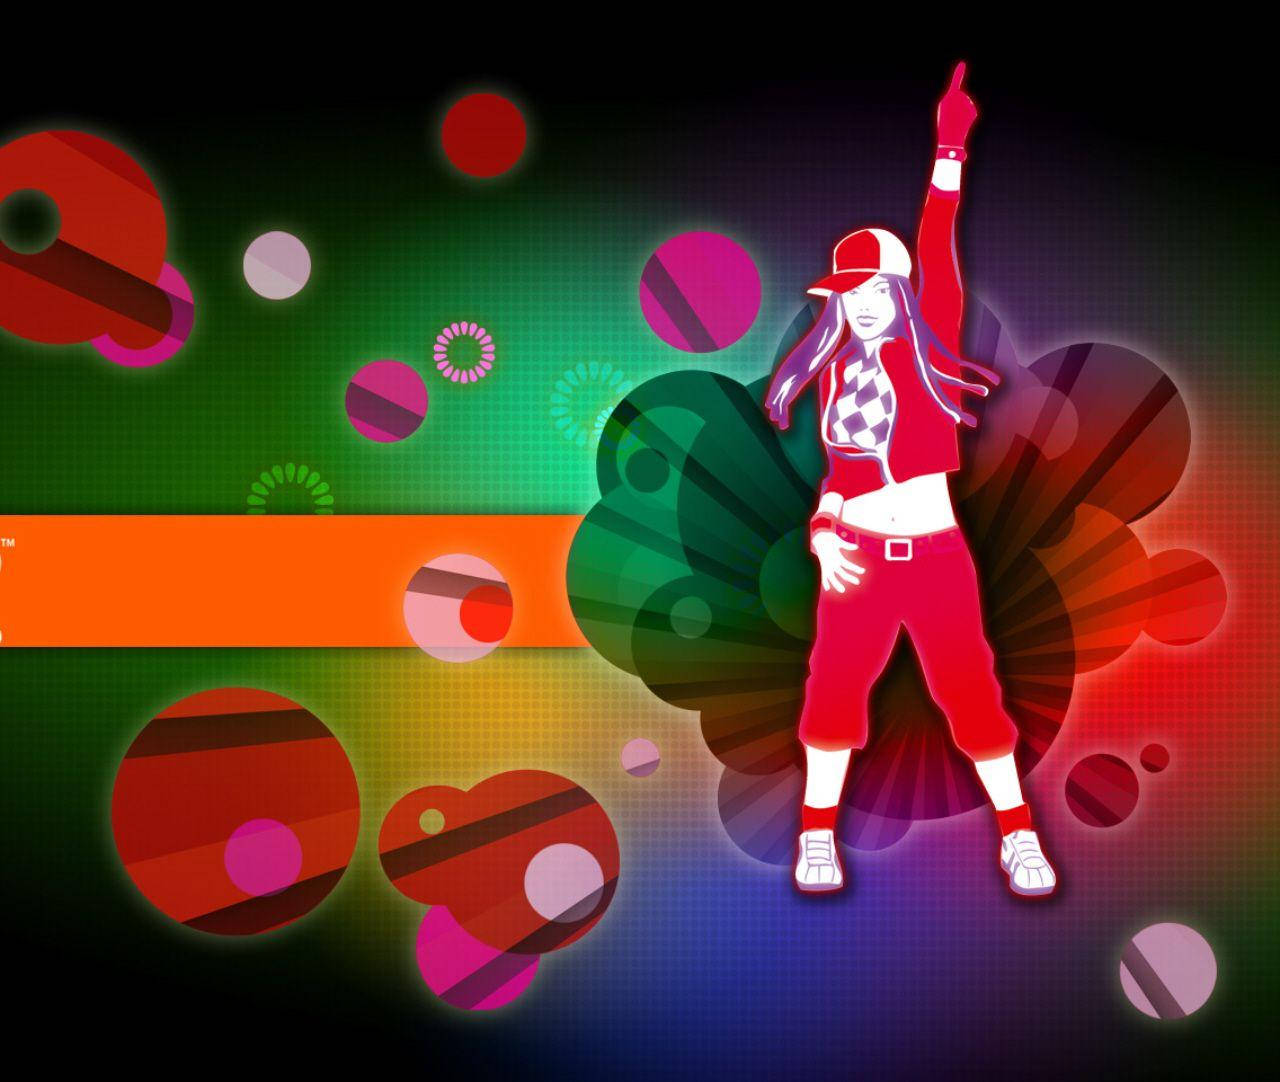 Just Dance 3 Dancer With Abstract Circles Wallpaper